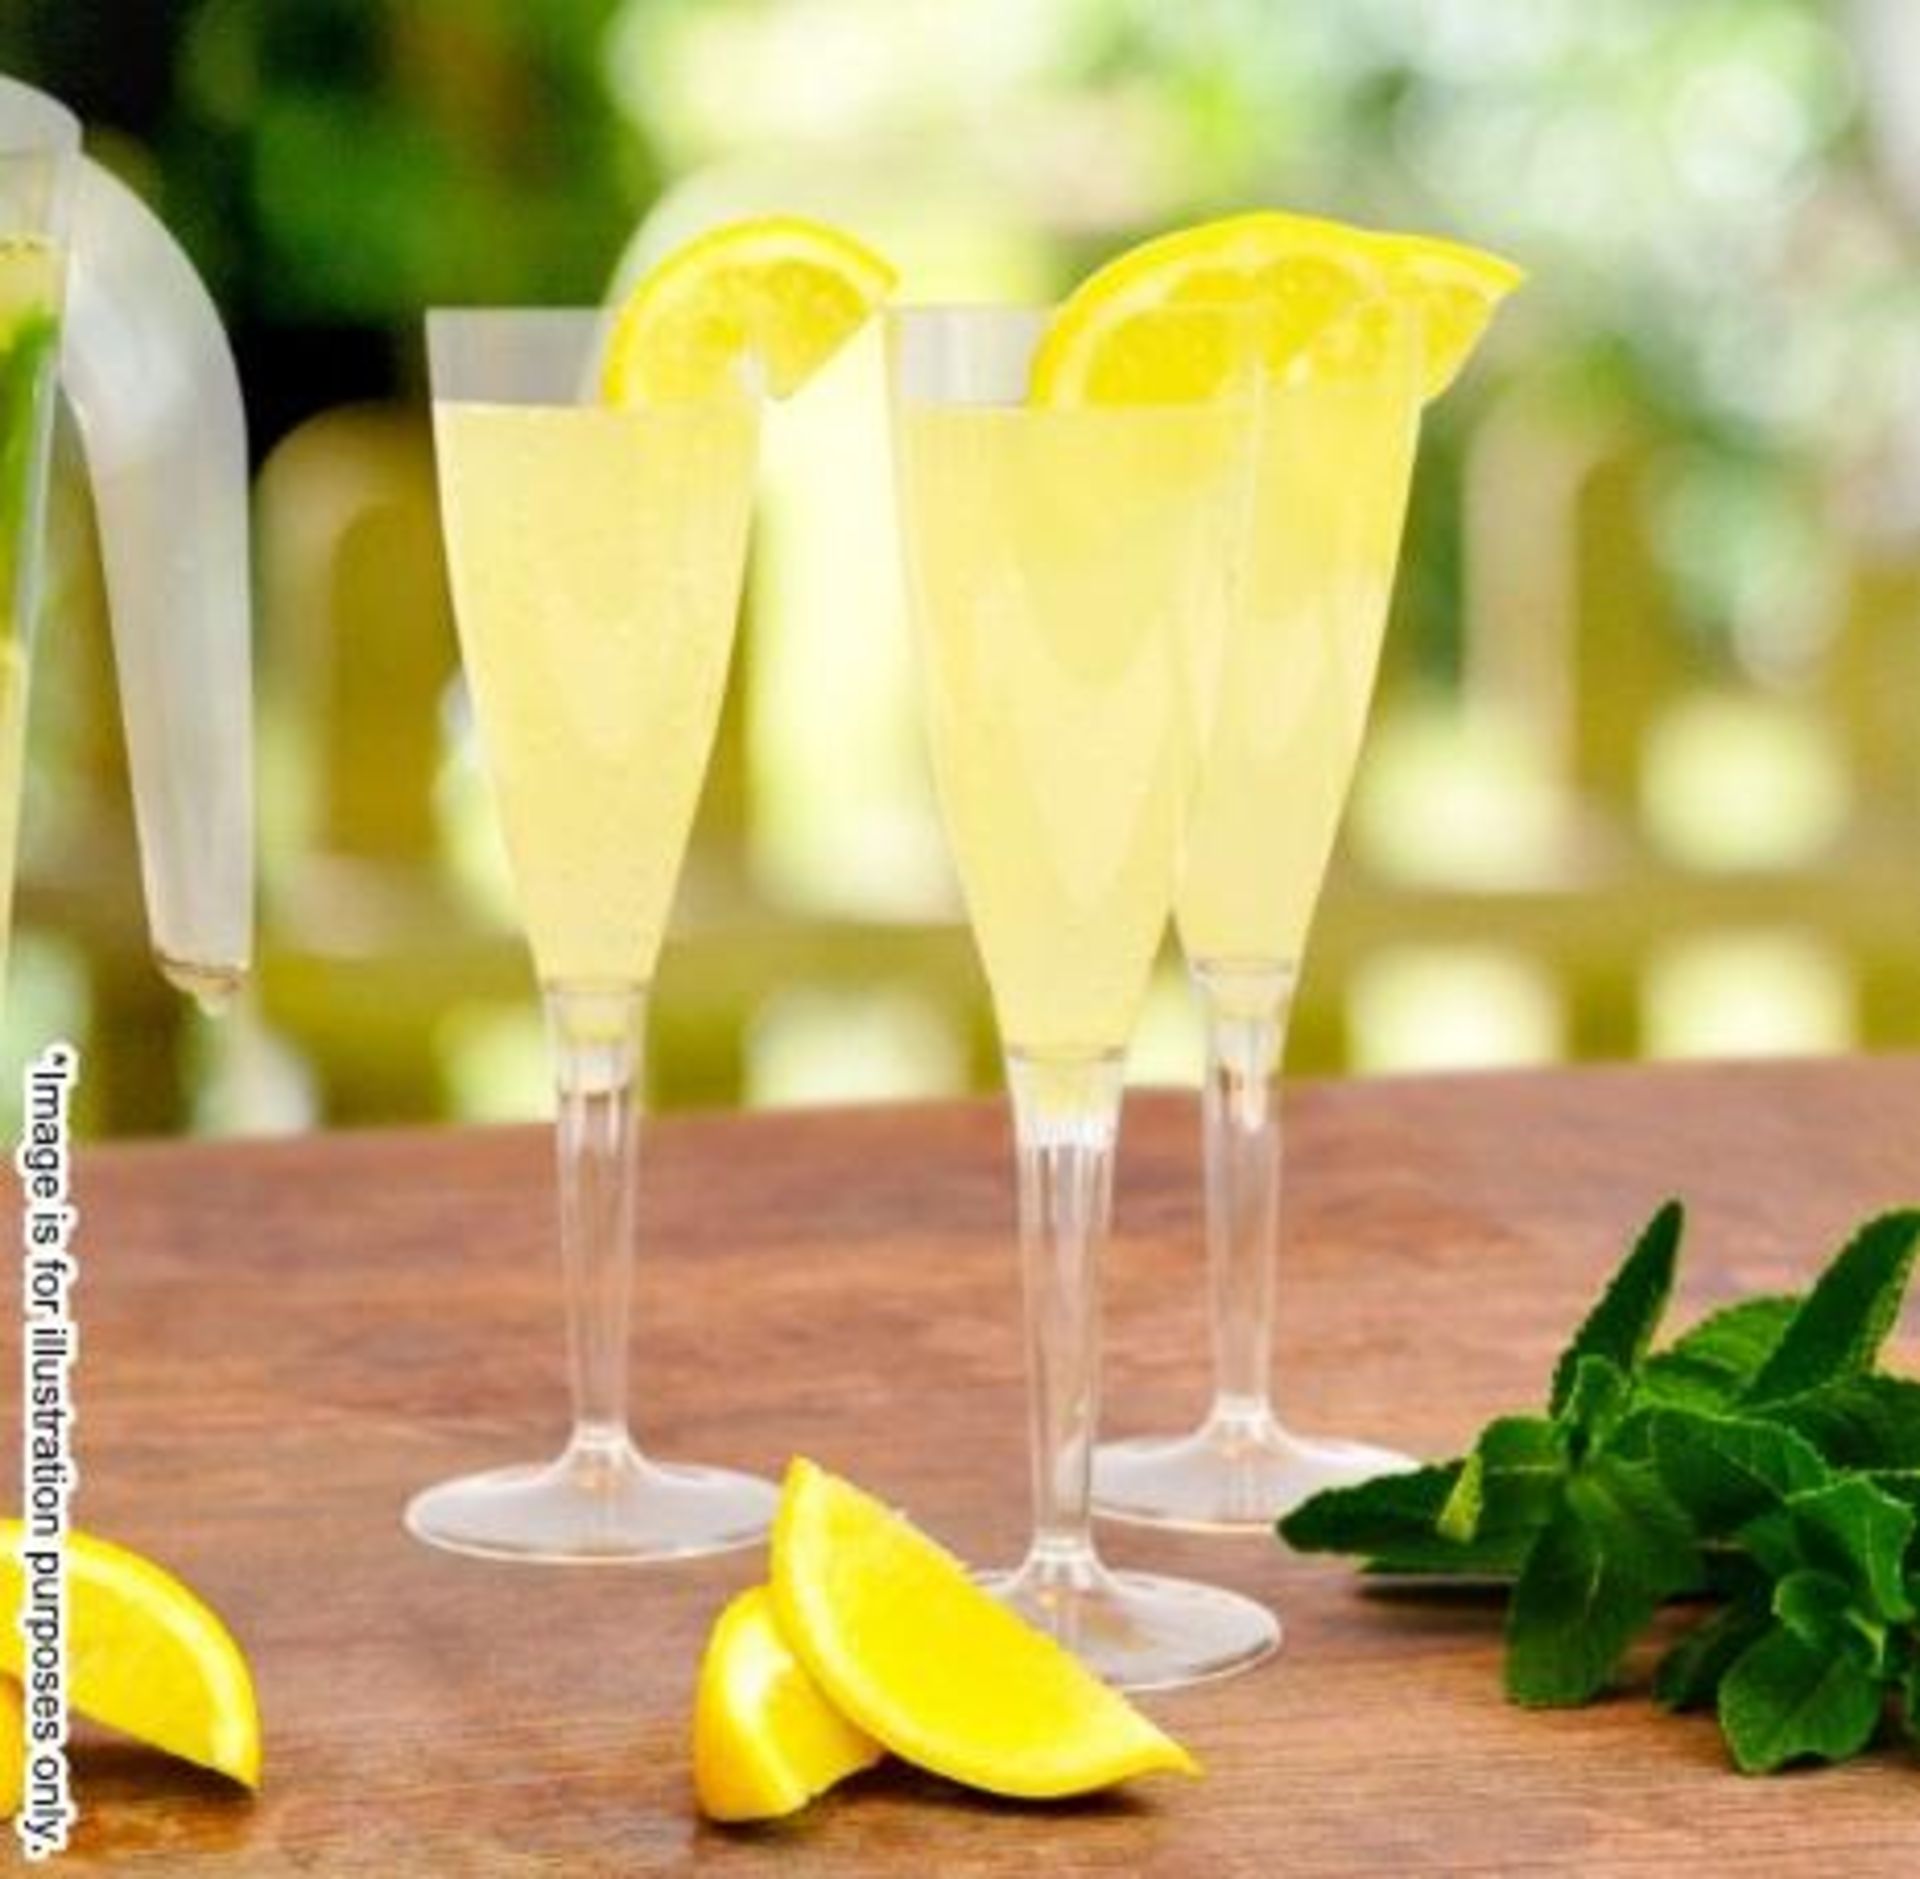 1,000 x Disposable Clear Plastic Champagne Flutes (170ml) - Brand: Remmerco CG111P - Brand New - Image 4 of 4